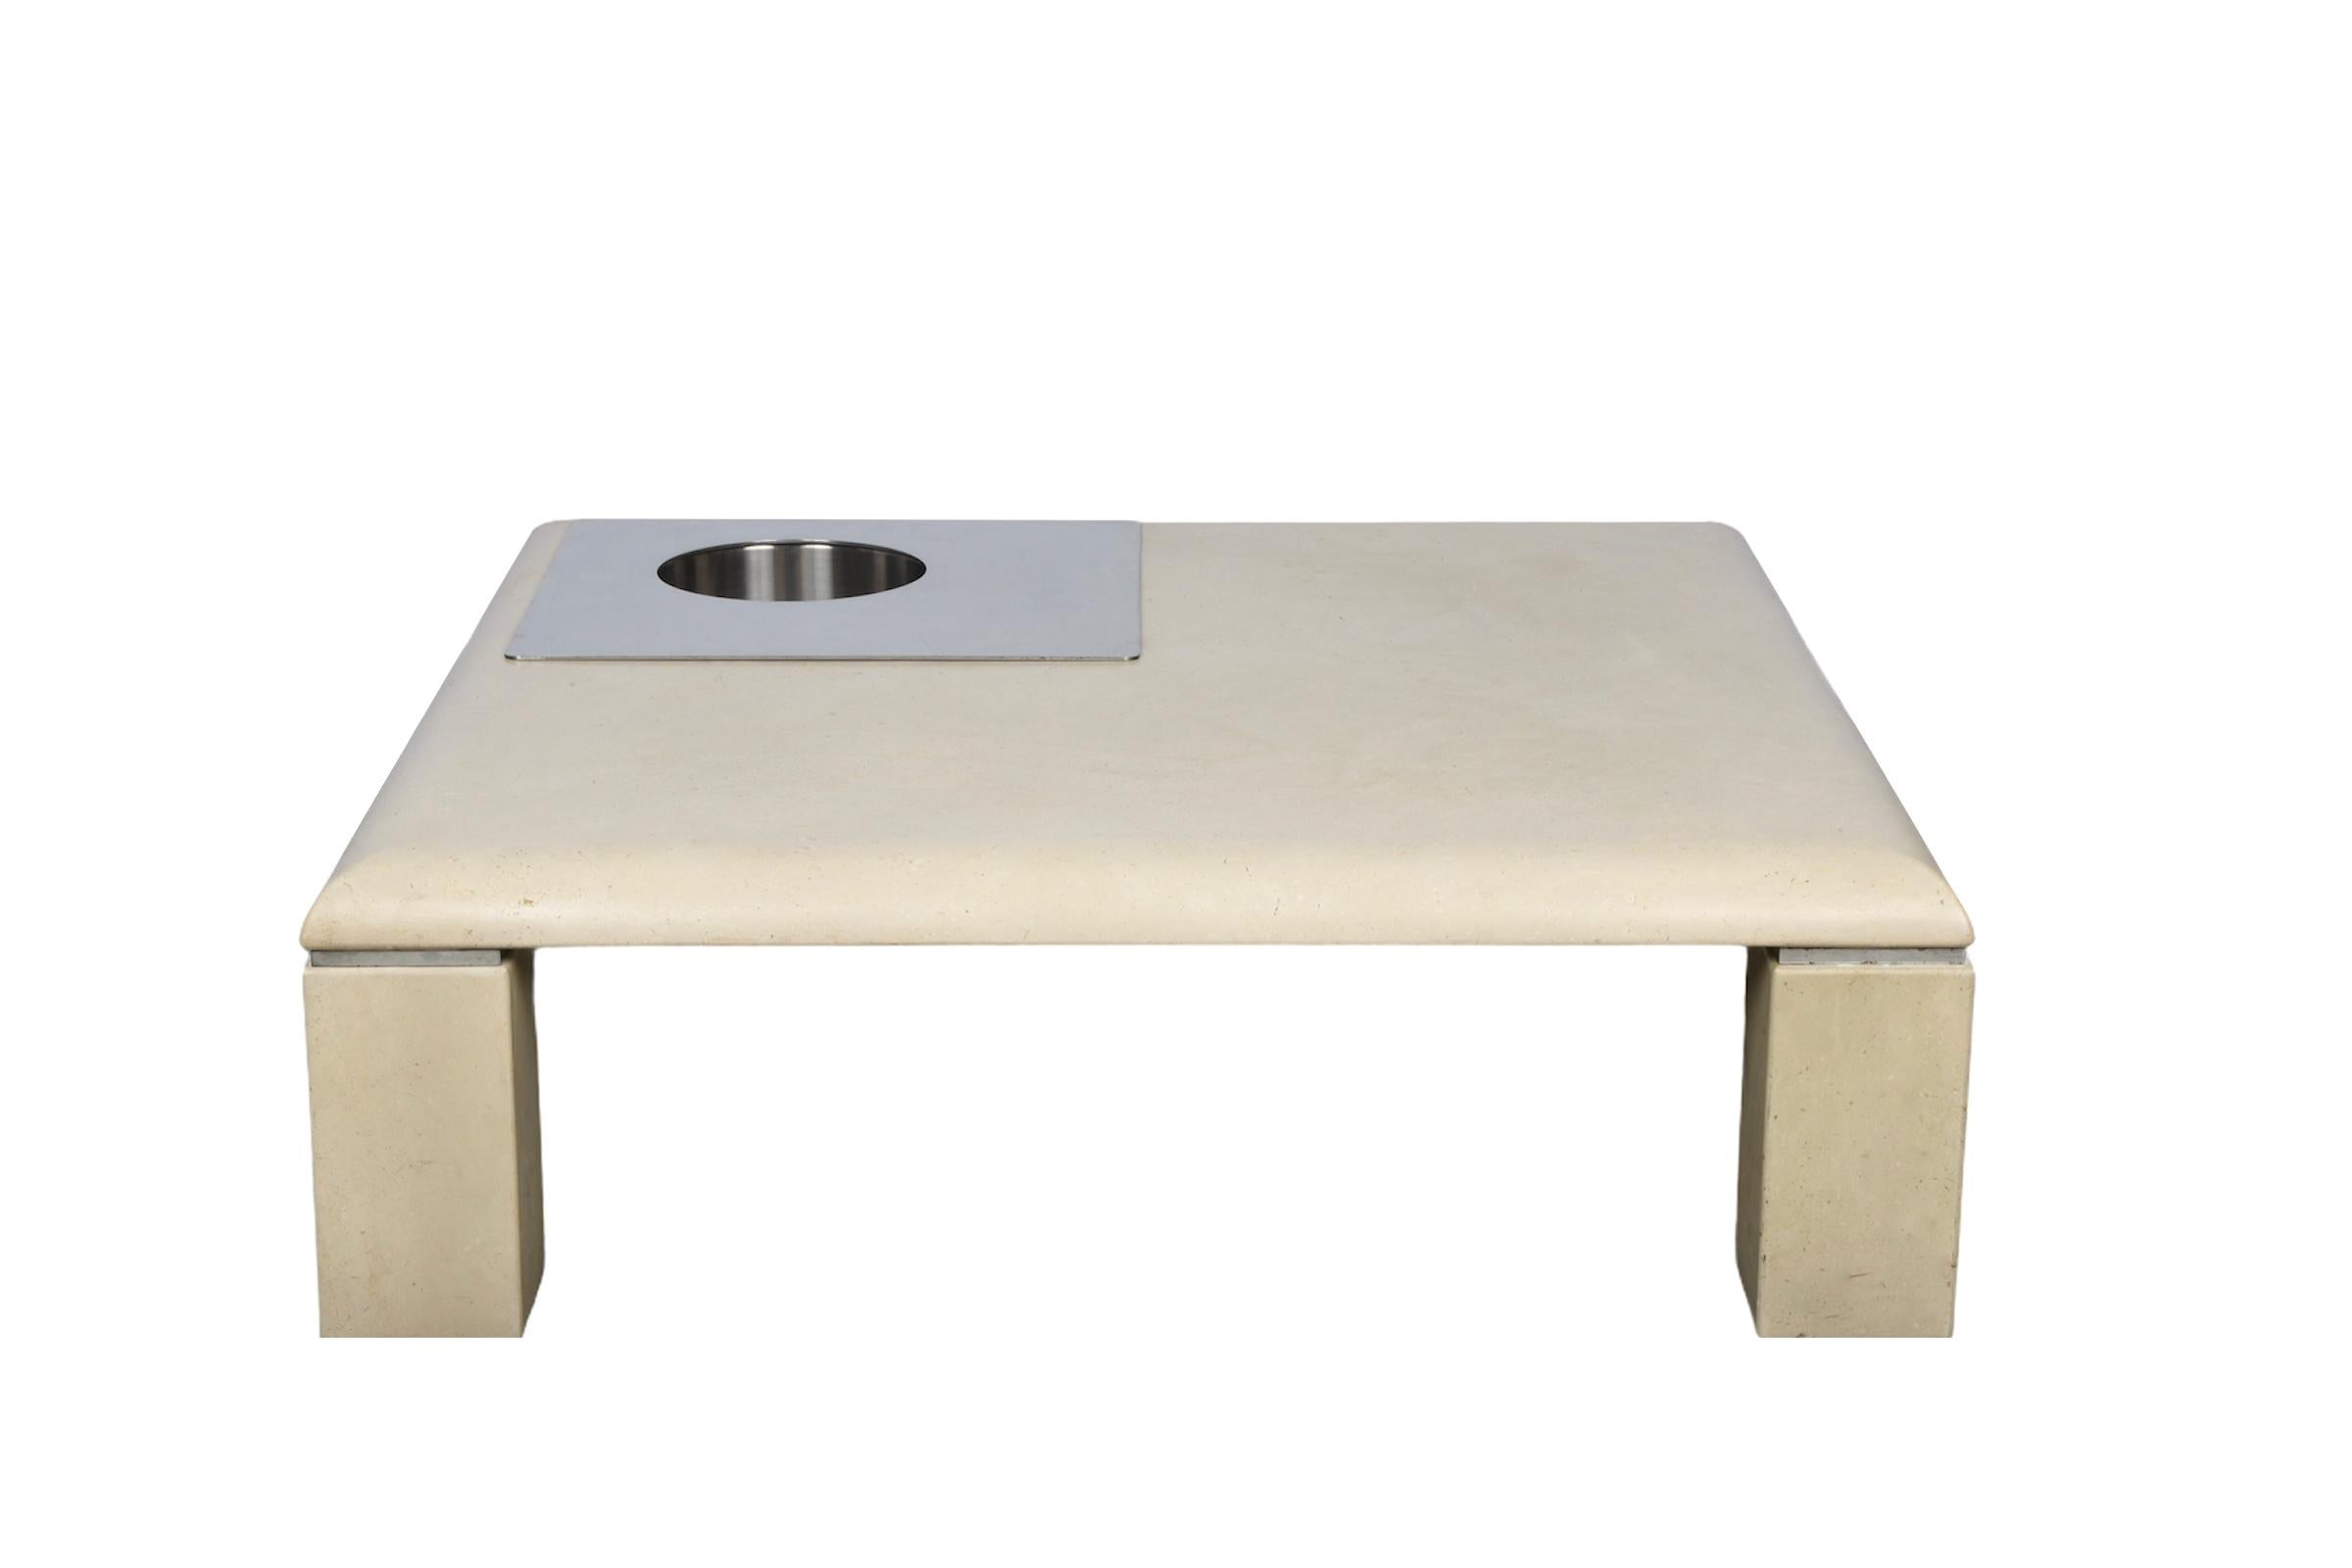 Late 20th Century Willy Rizzo Italian Squared White Botticino Marble and Steel Coffee Table, 1970 For Sale